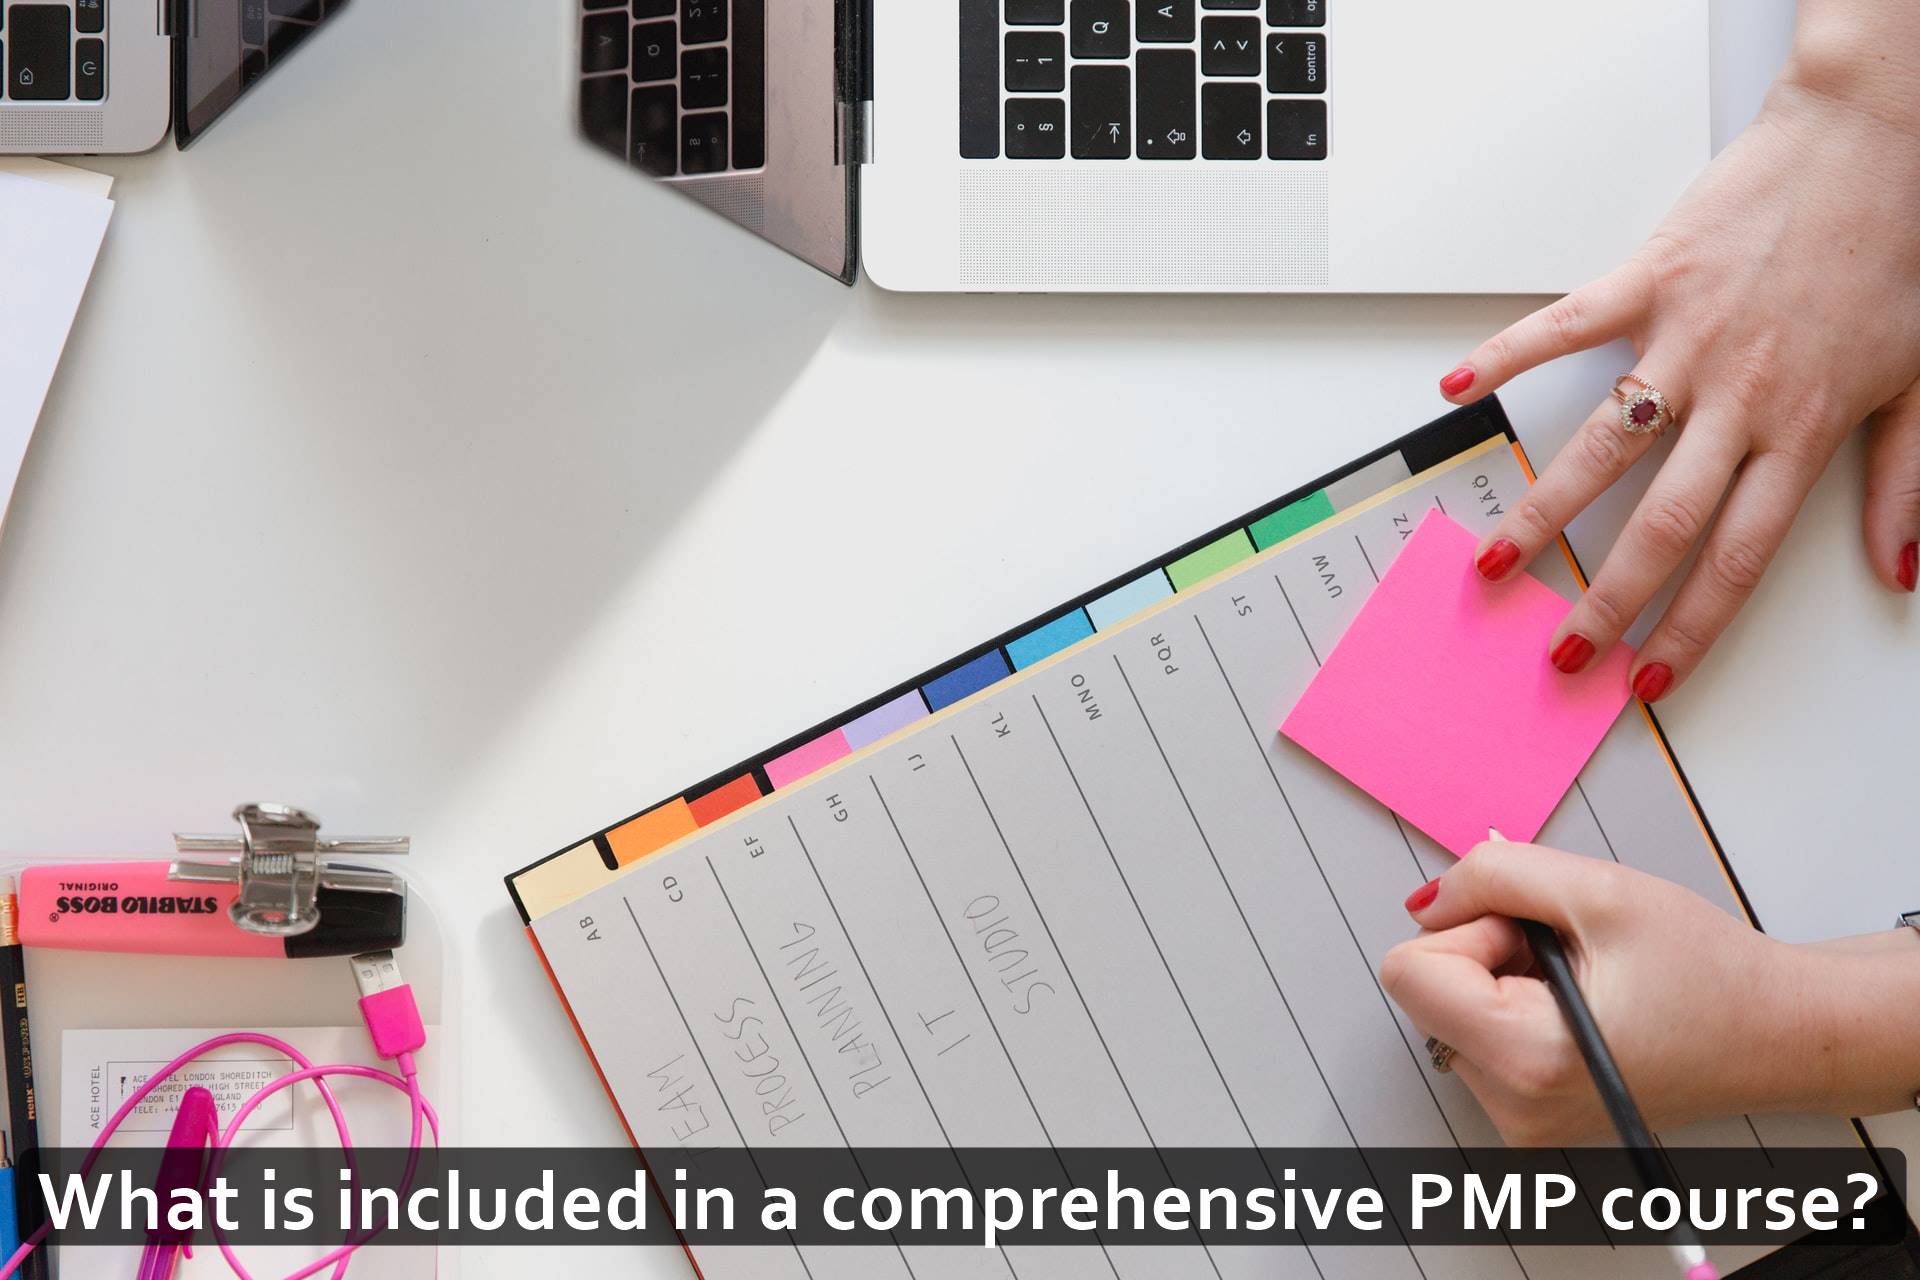 What is included in a comprehensive PMP course?